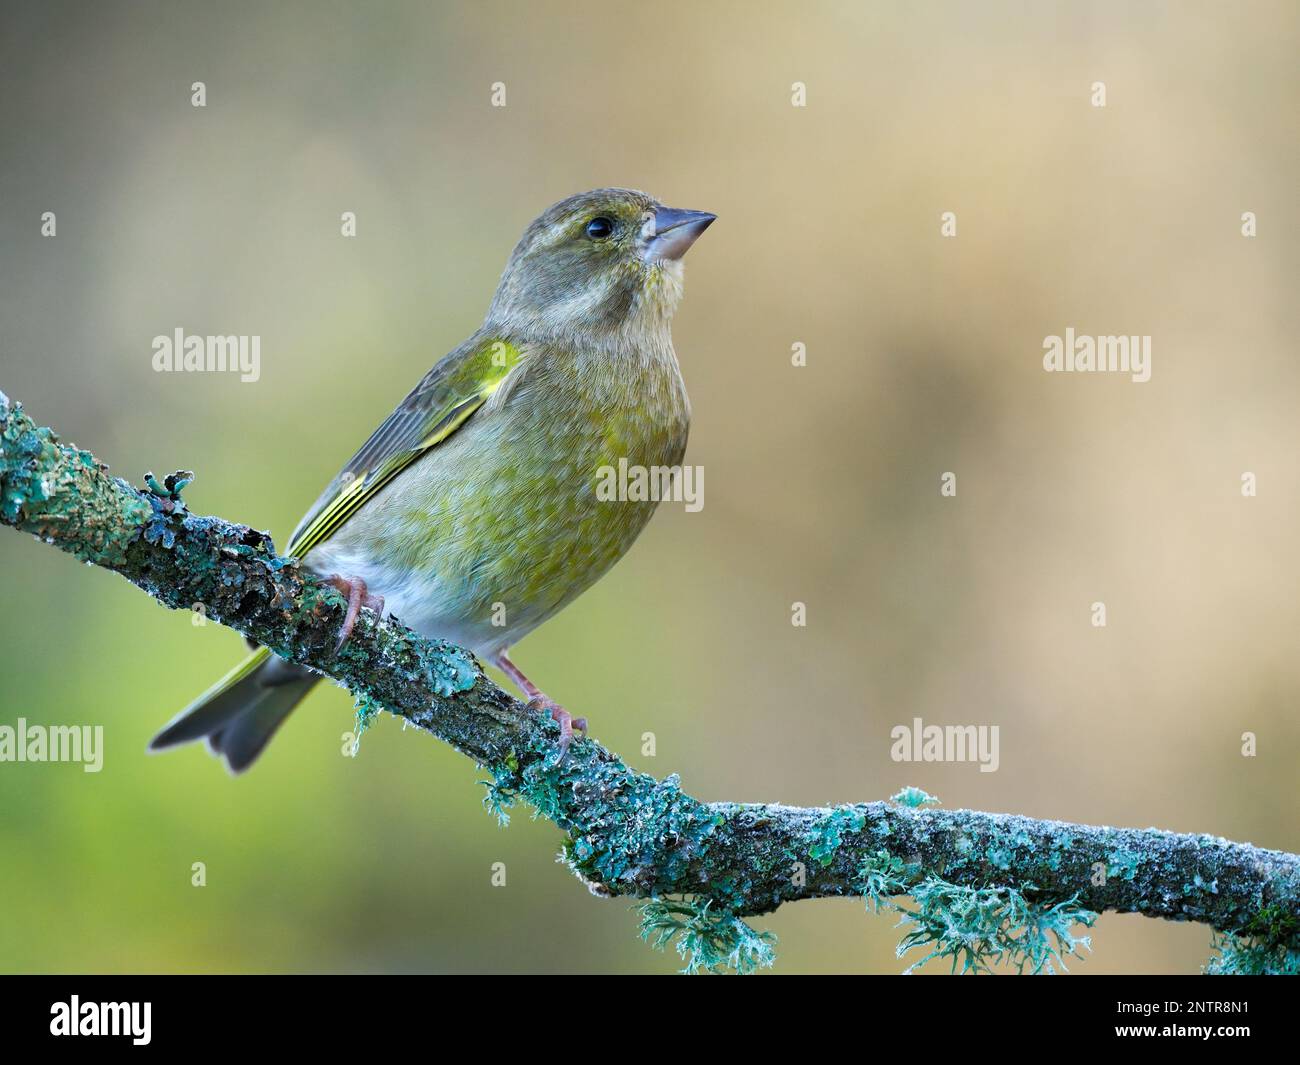 A greenfinch (Chloris chloris) perched on a lichen covered branch. Photographed in Dorset, UK in December. Stock Photo